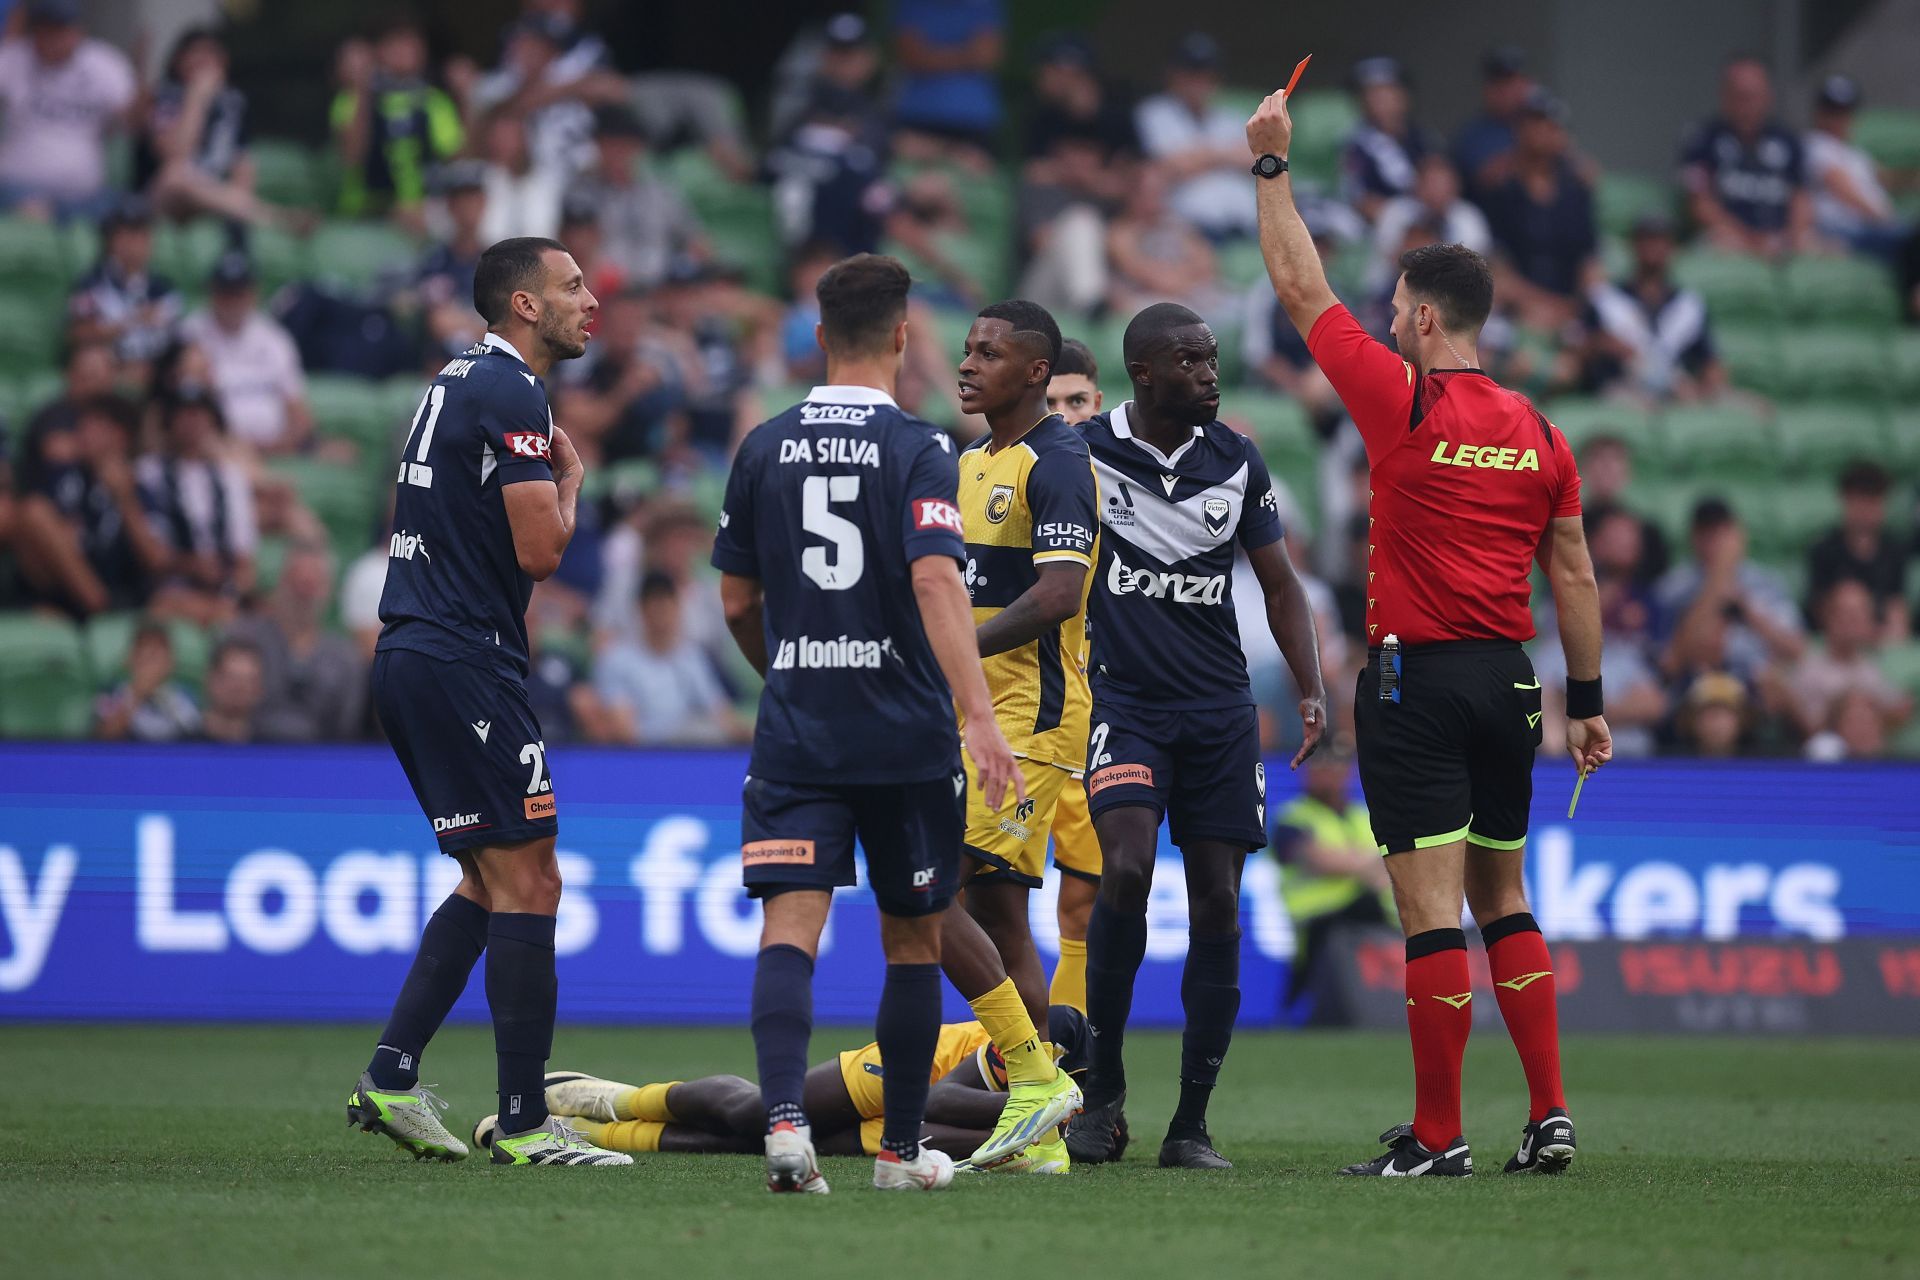 A-League Men Rd 18 - Melbourne Victory v Central Coast Mariners